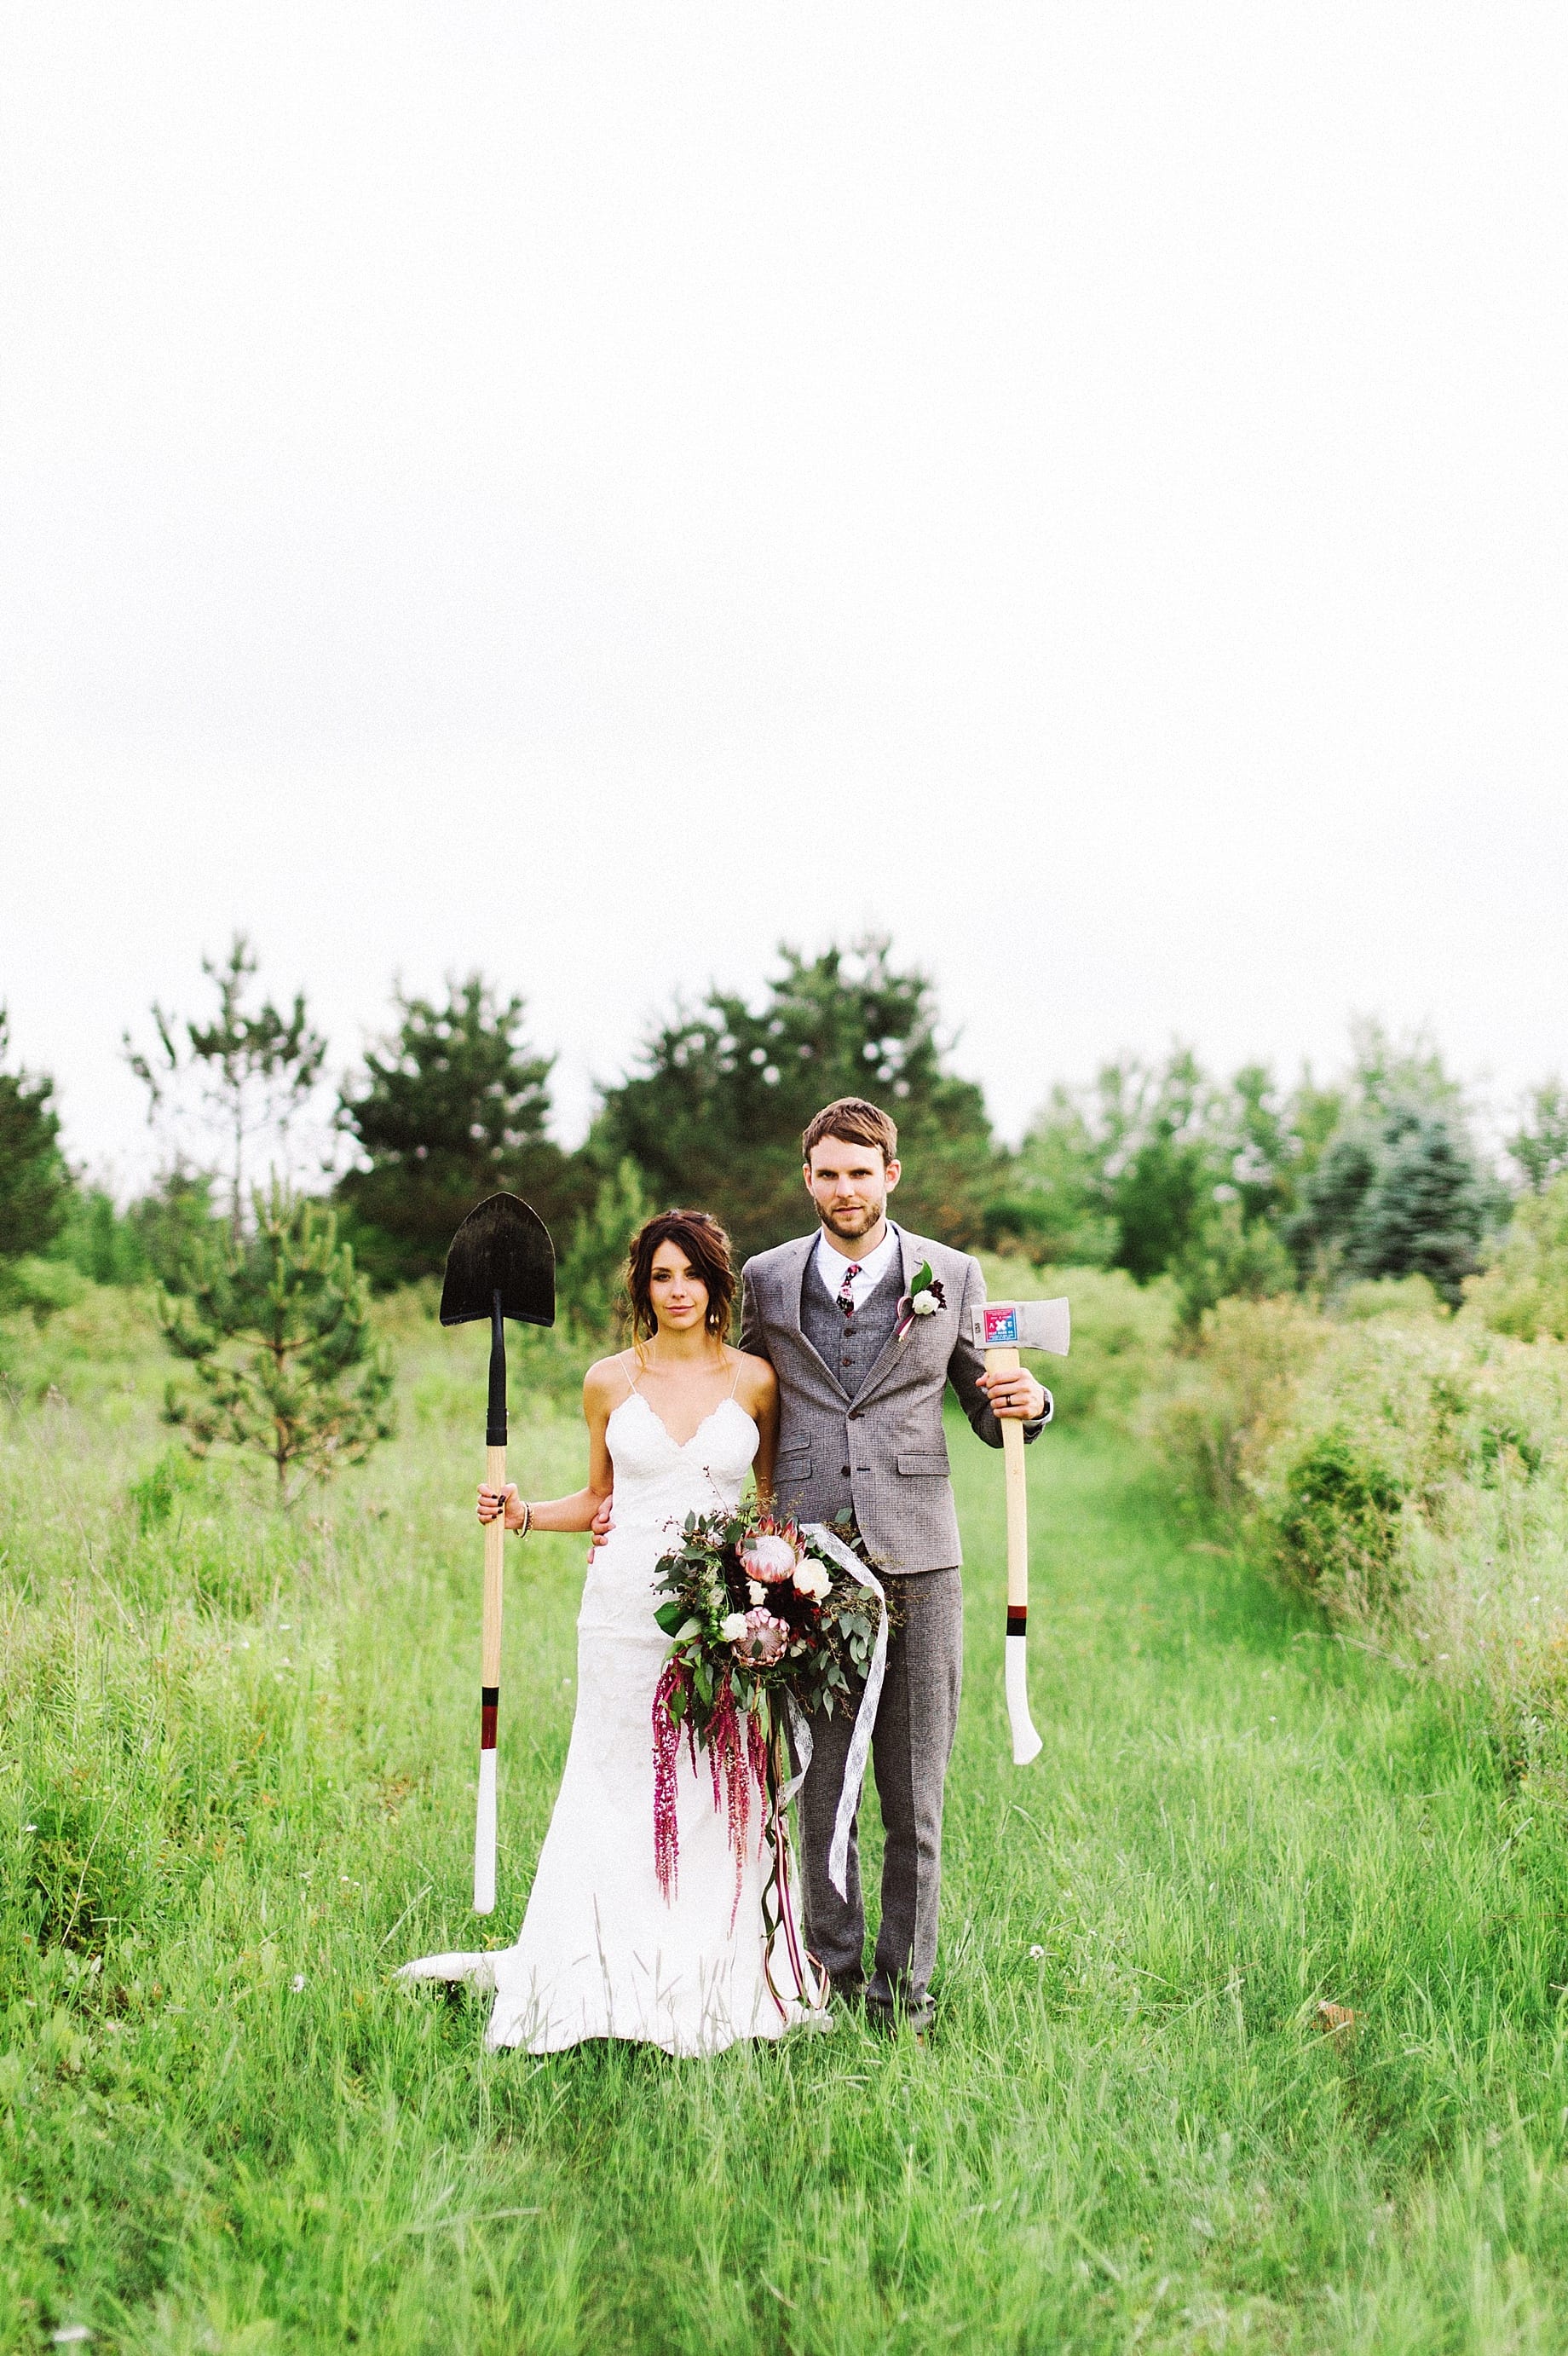 american gothic style bride and groom portrait